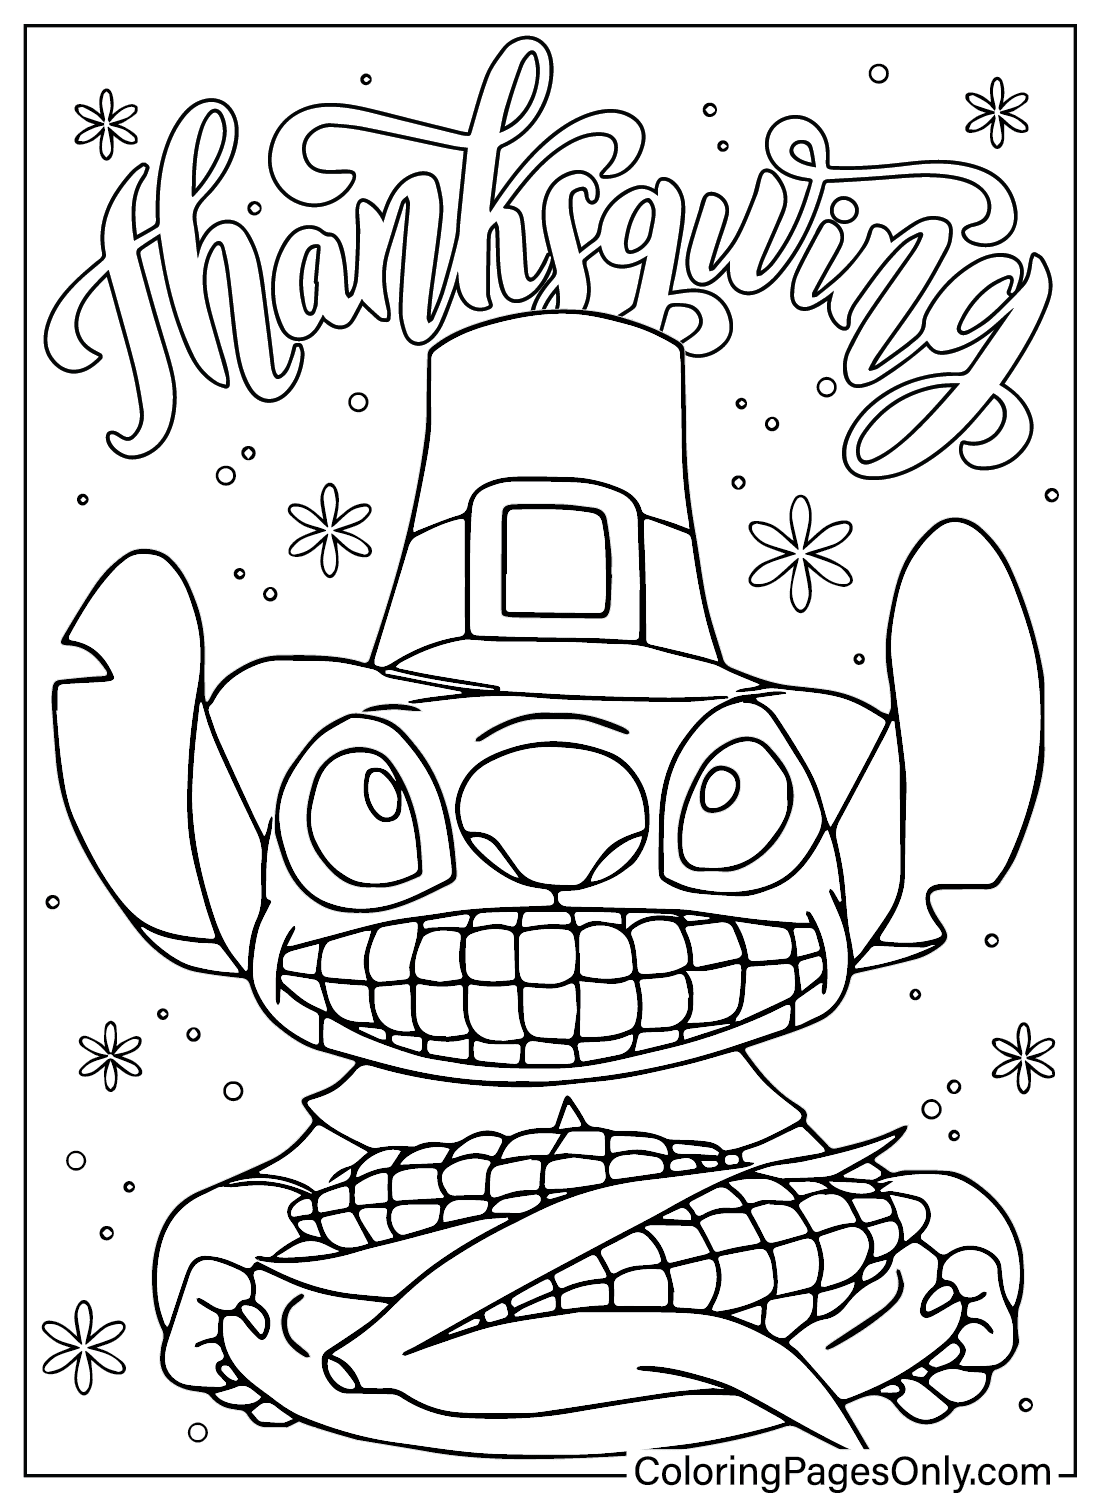 Stitch Disney Thanksgiving Coloring Page from Disney Thanksgiving